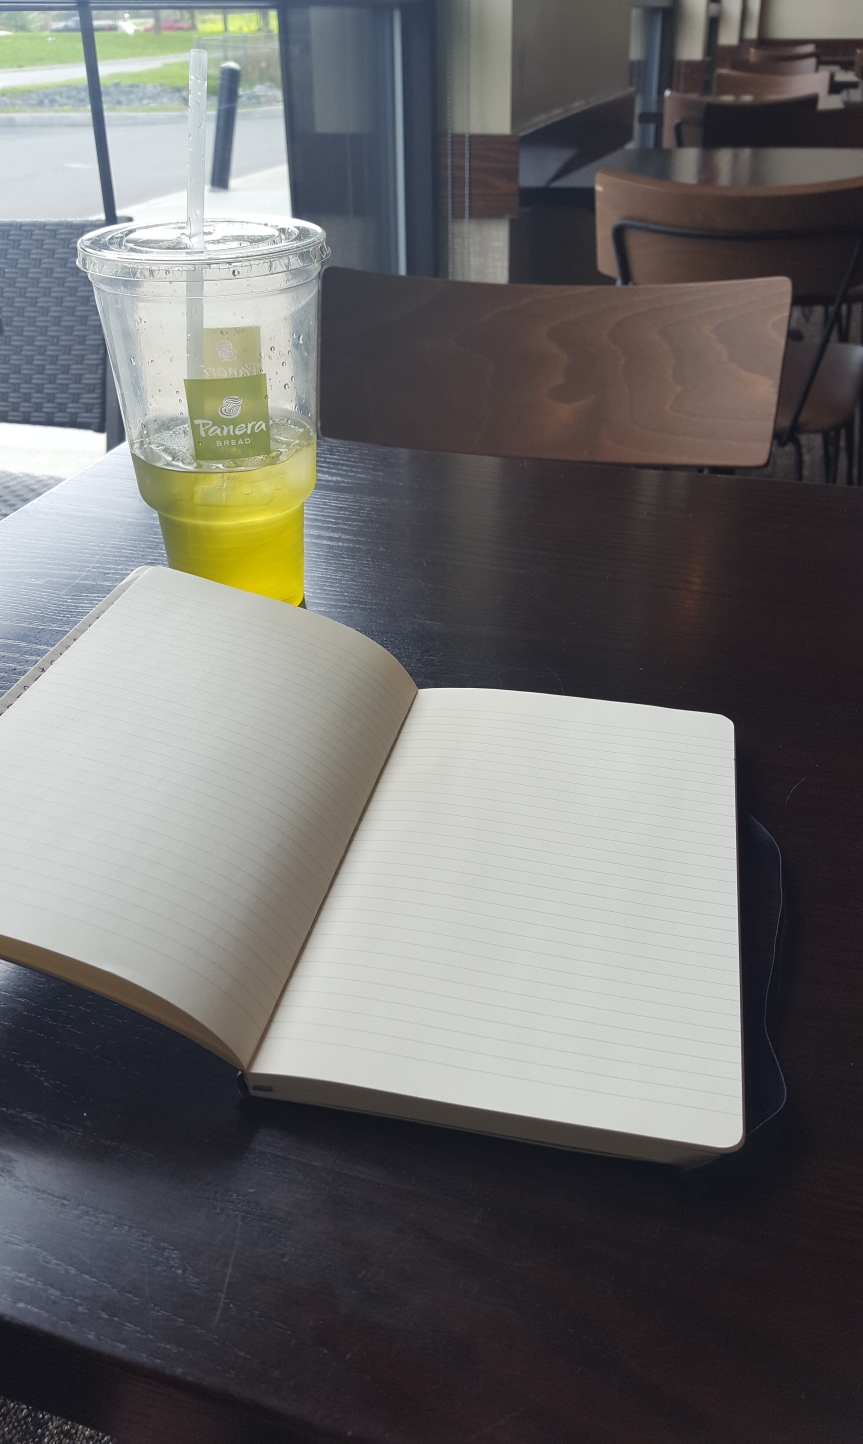 Why I’ve never finished a journal